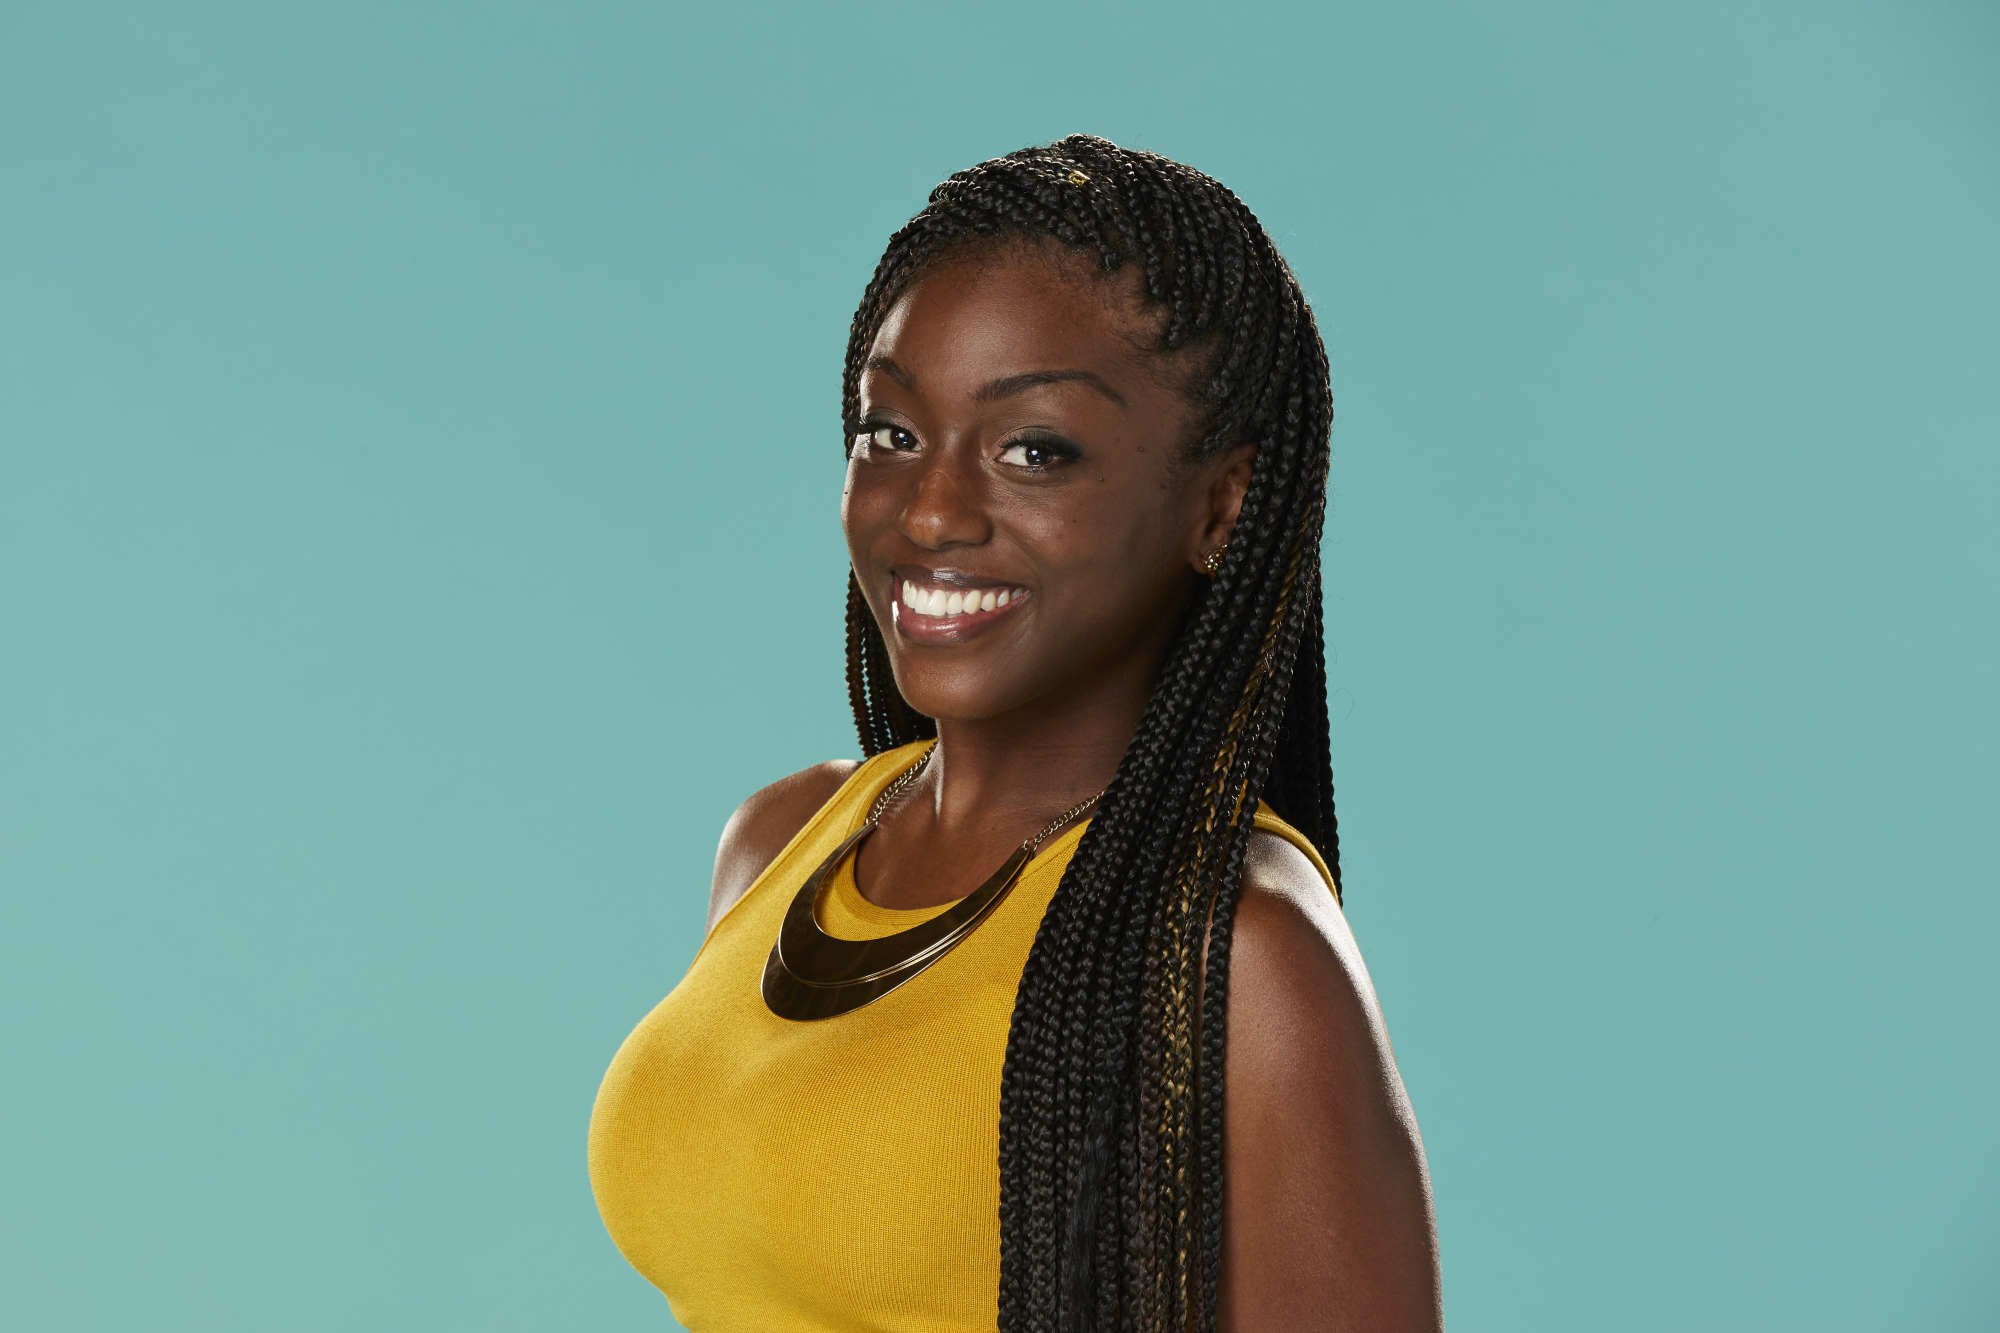 DaVonne Rogers of the CBS series Big Brother